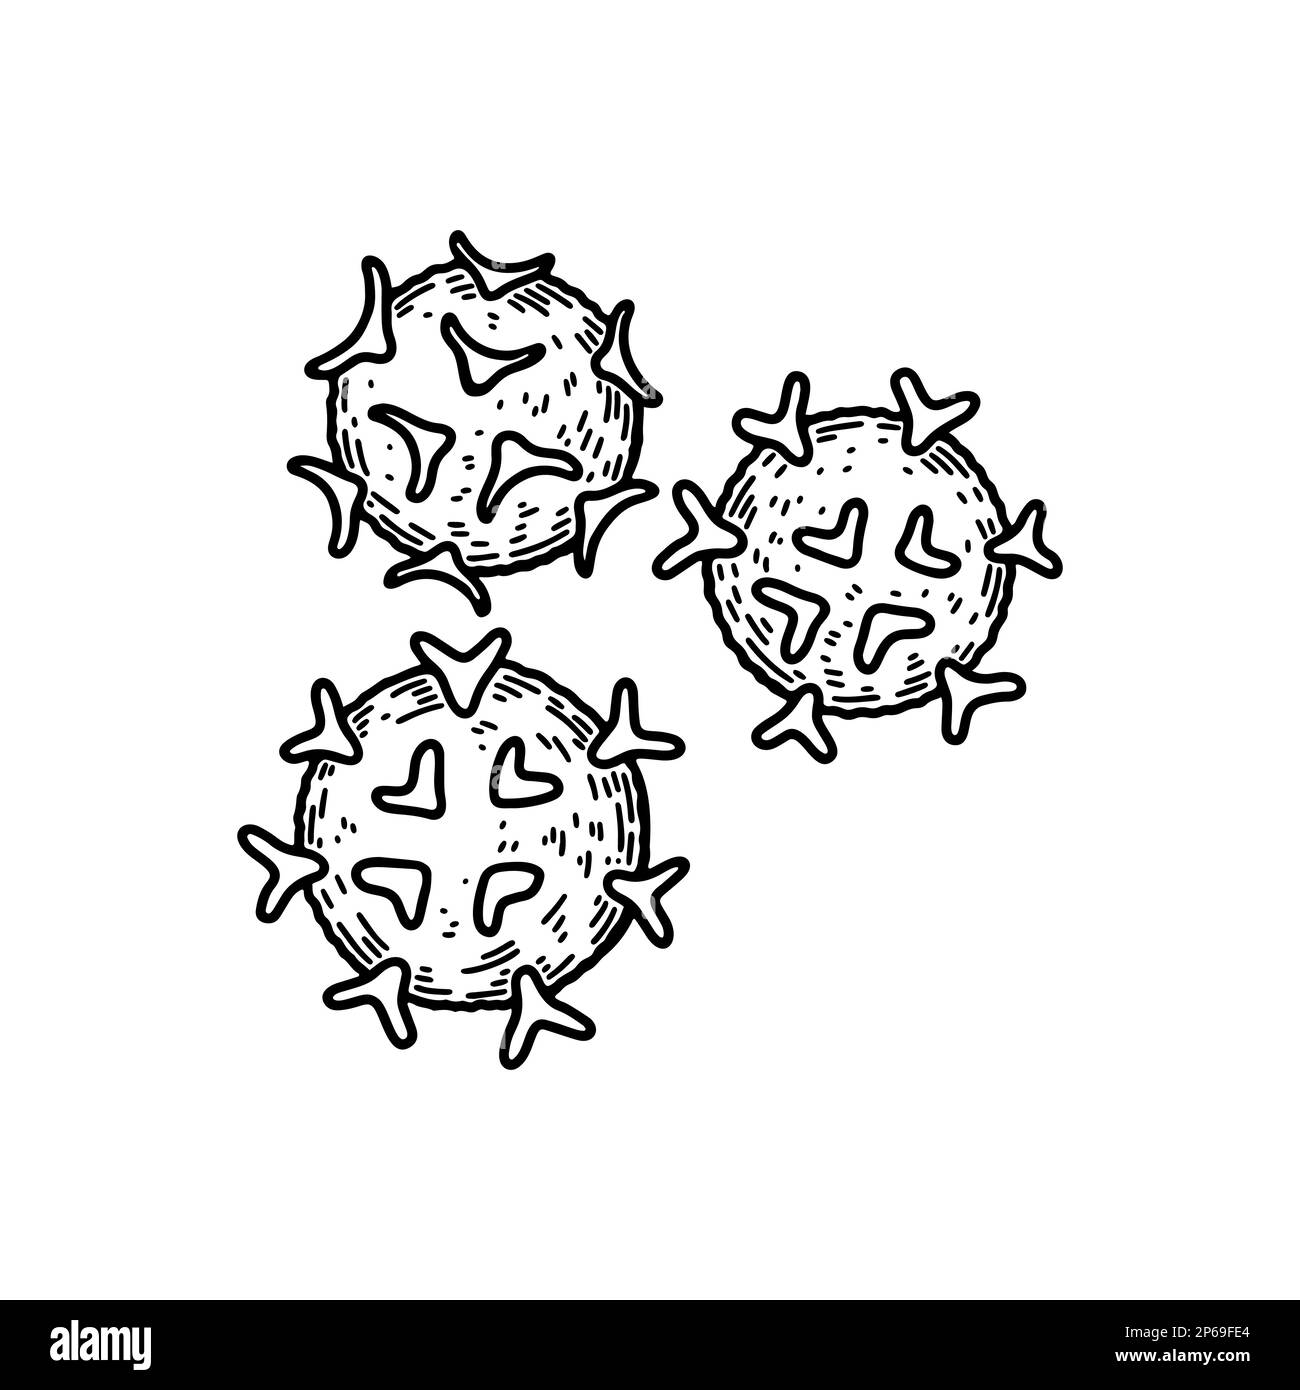 Lymphocytes white blood cells isolated on white background. Hand drawn scientific microbiology vector illustration in sketch style Stock Vector